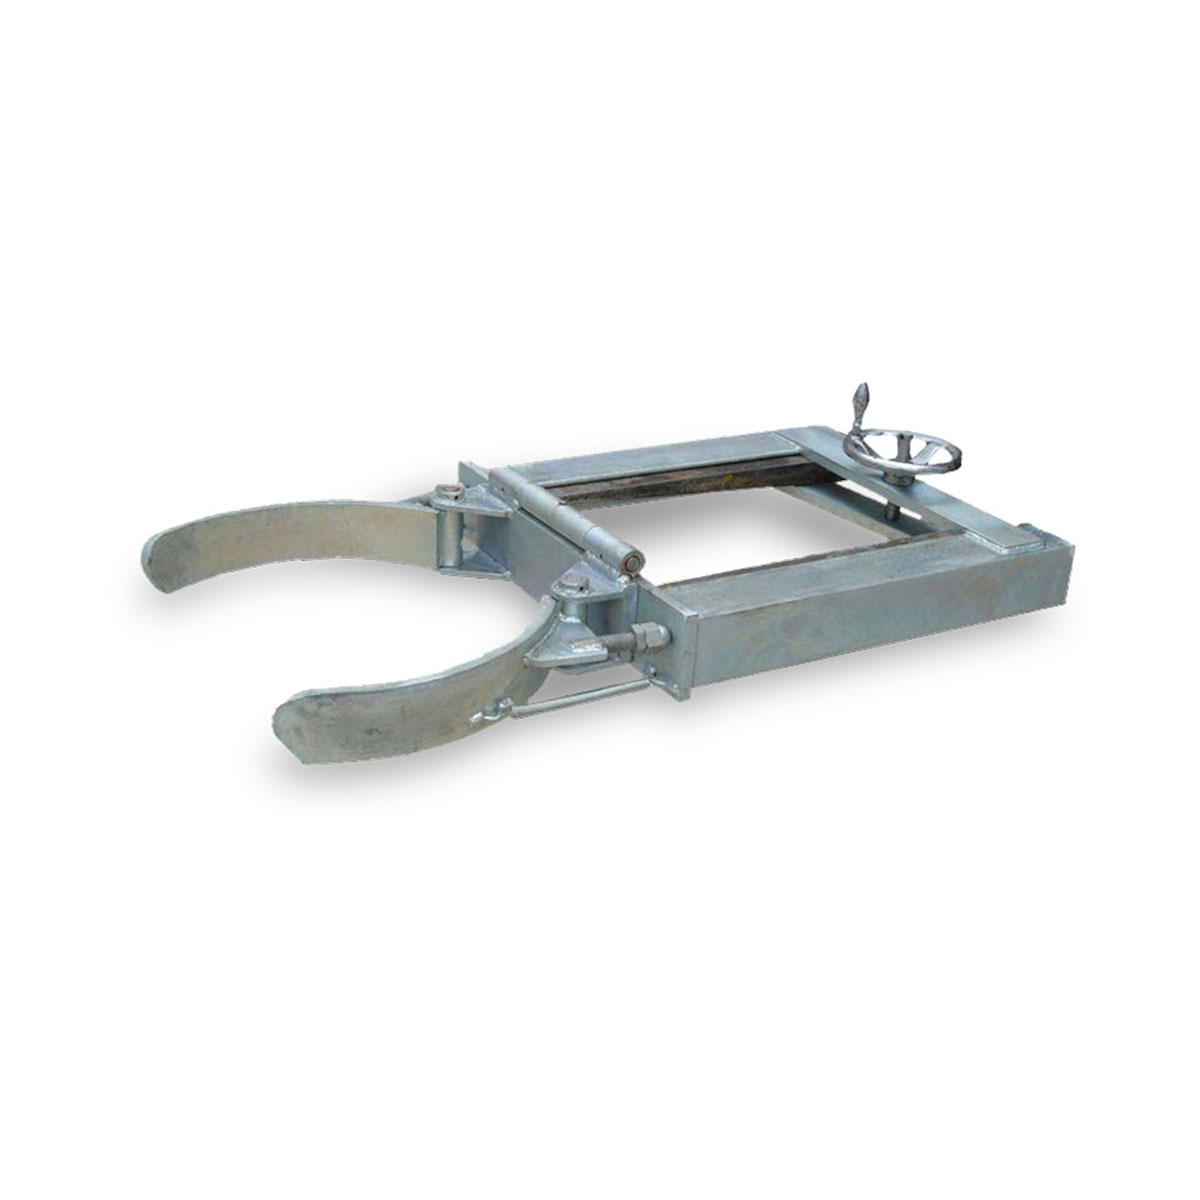 Drum Lifter Spade Attachment Model Image